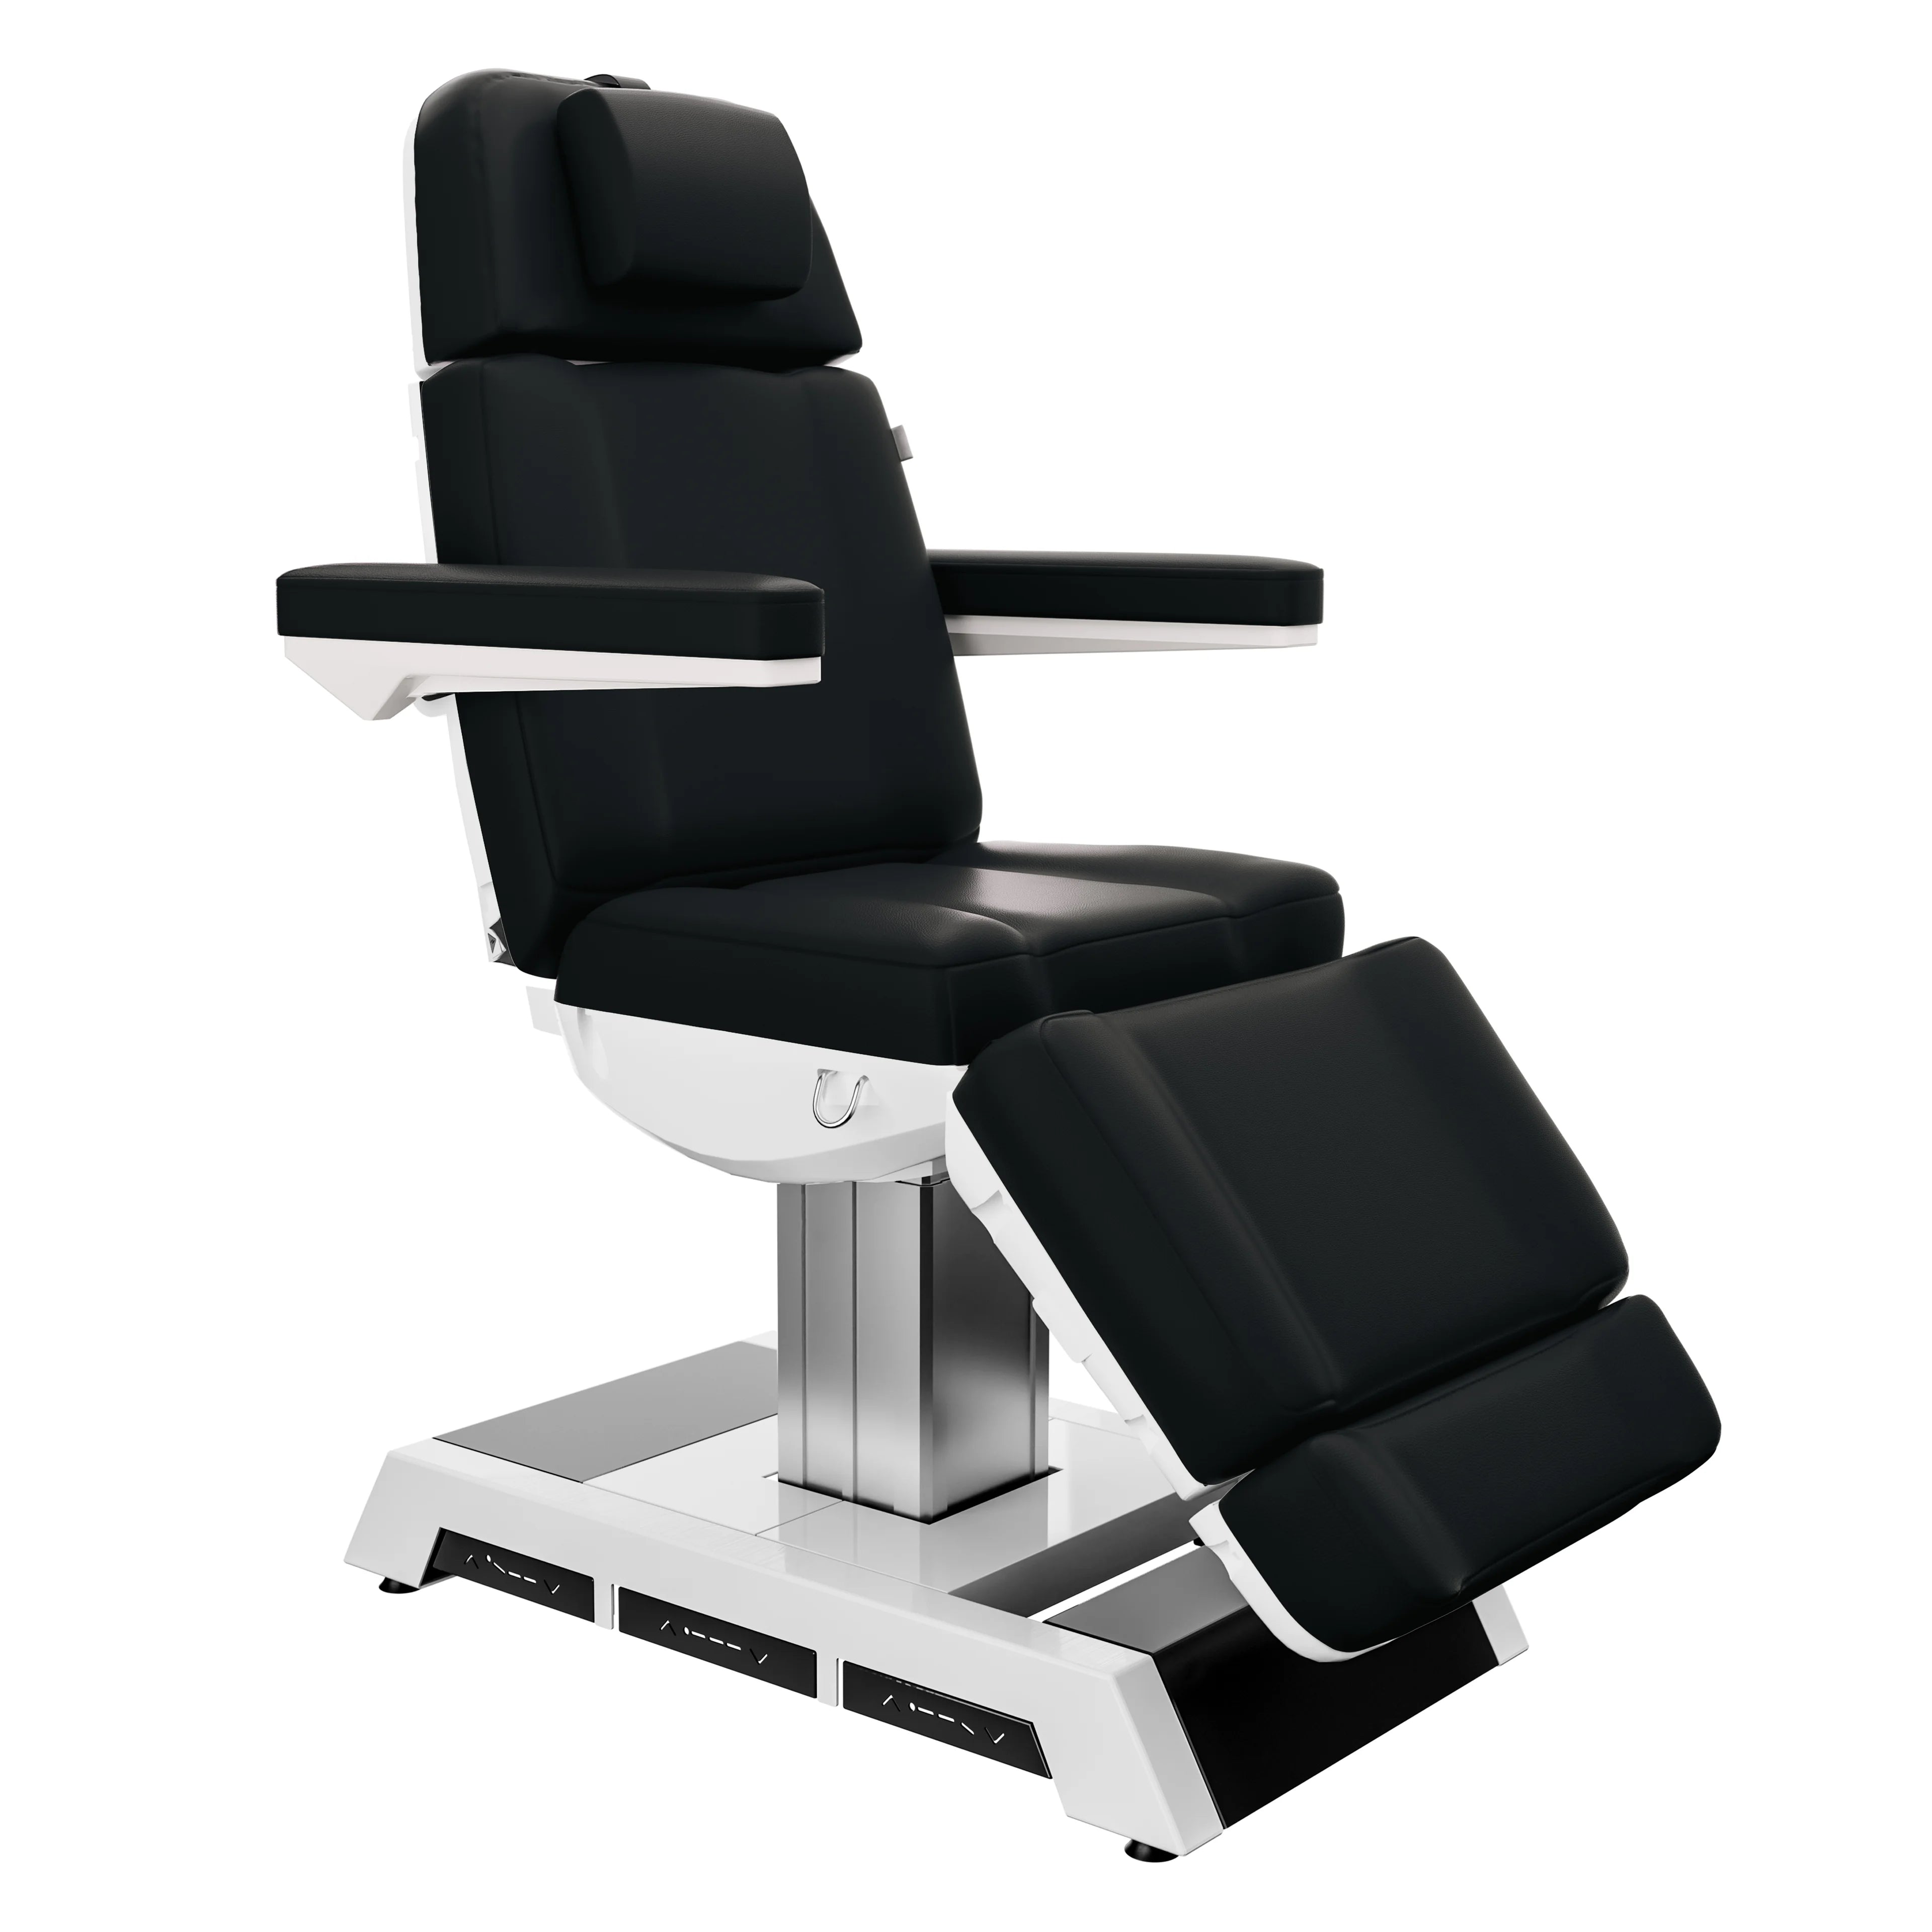 SpaMarc . Adones . 4 Motor Spa Treatment Chair/Bed